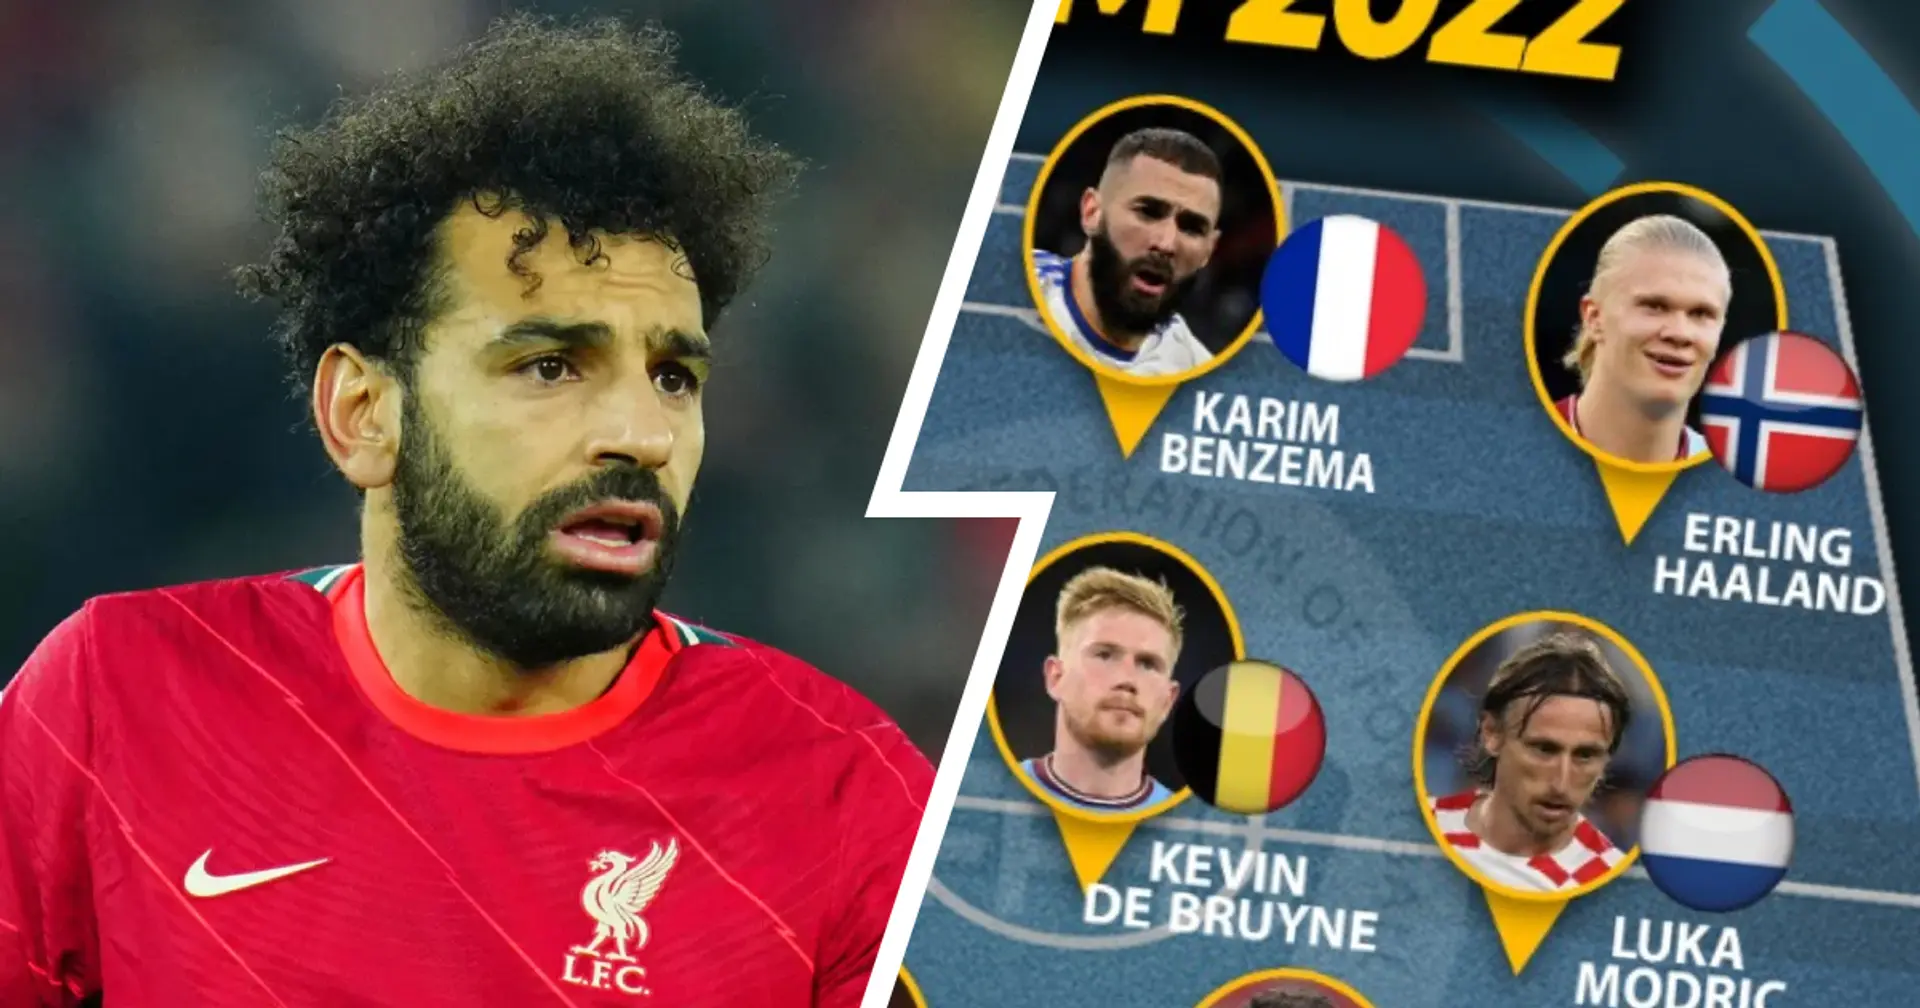 One Liverpool player gets into IFFHS World Team 2022 - not Salah